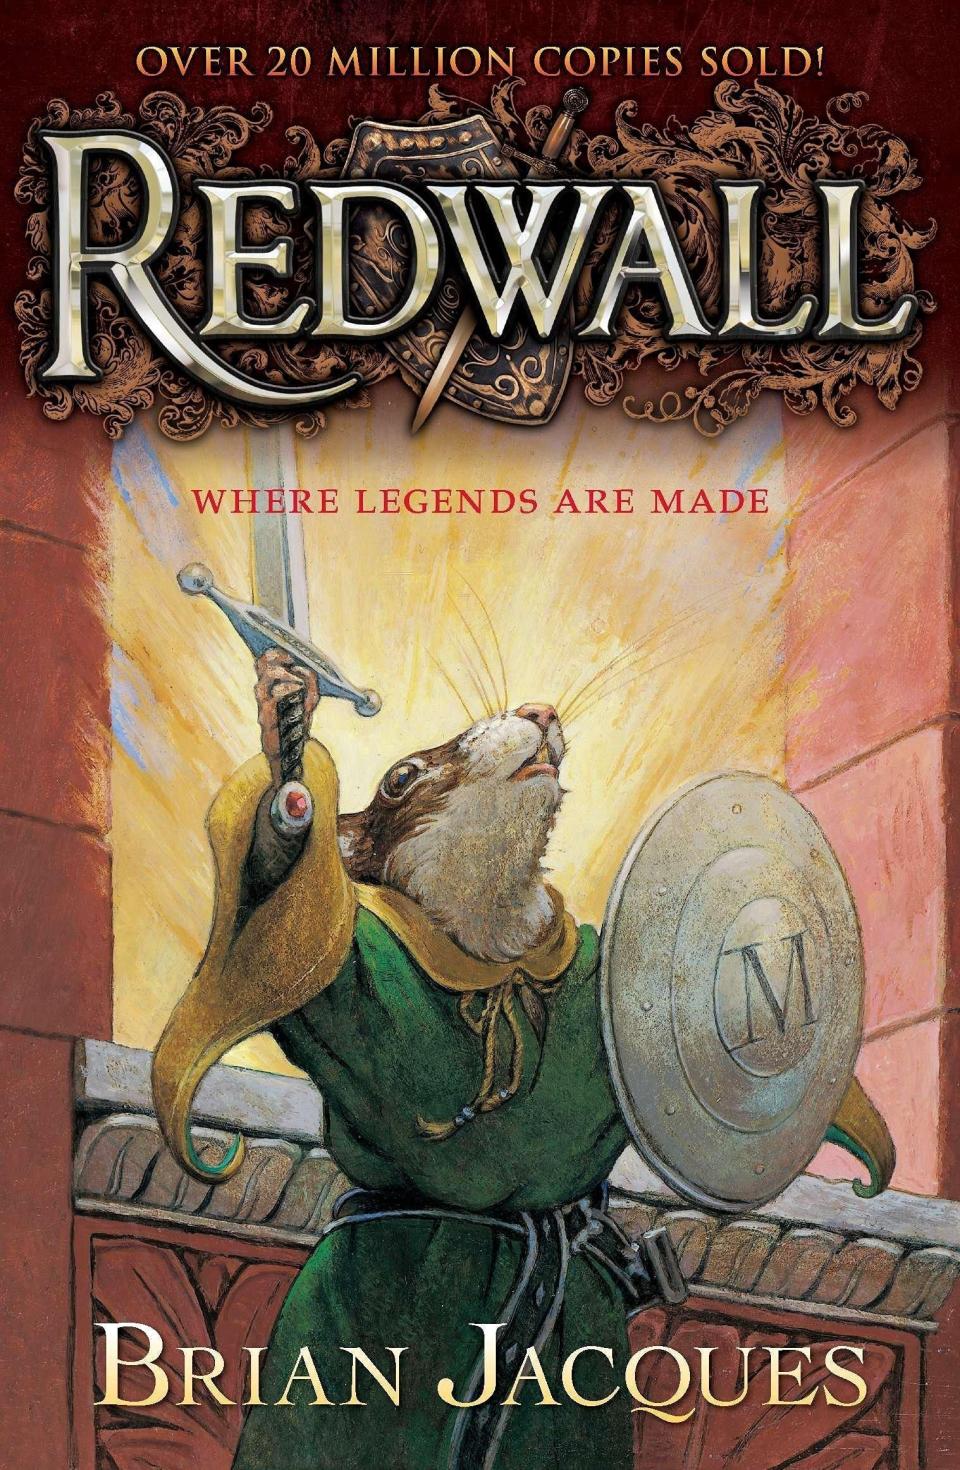 The cover of a book from "Redwall" series by Brian Jacques